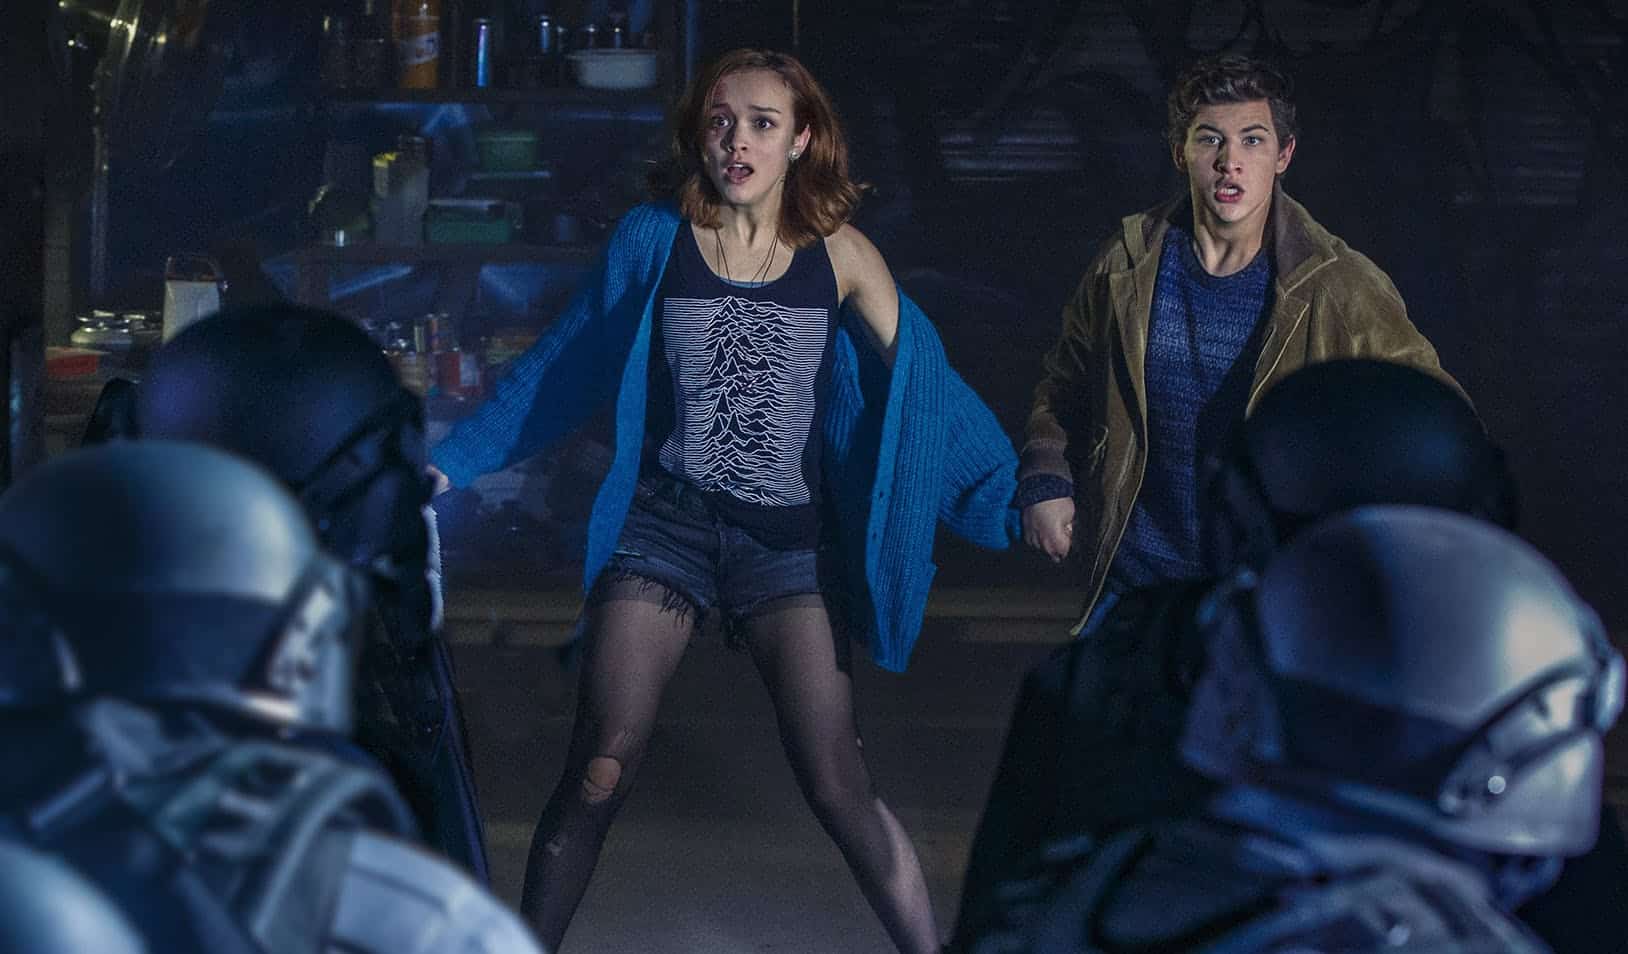 A teen girl and boy face off with soldiers in this image from Warner Bros. Pictures.